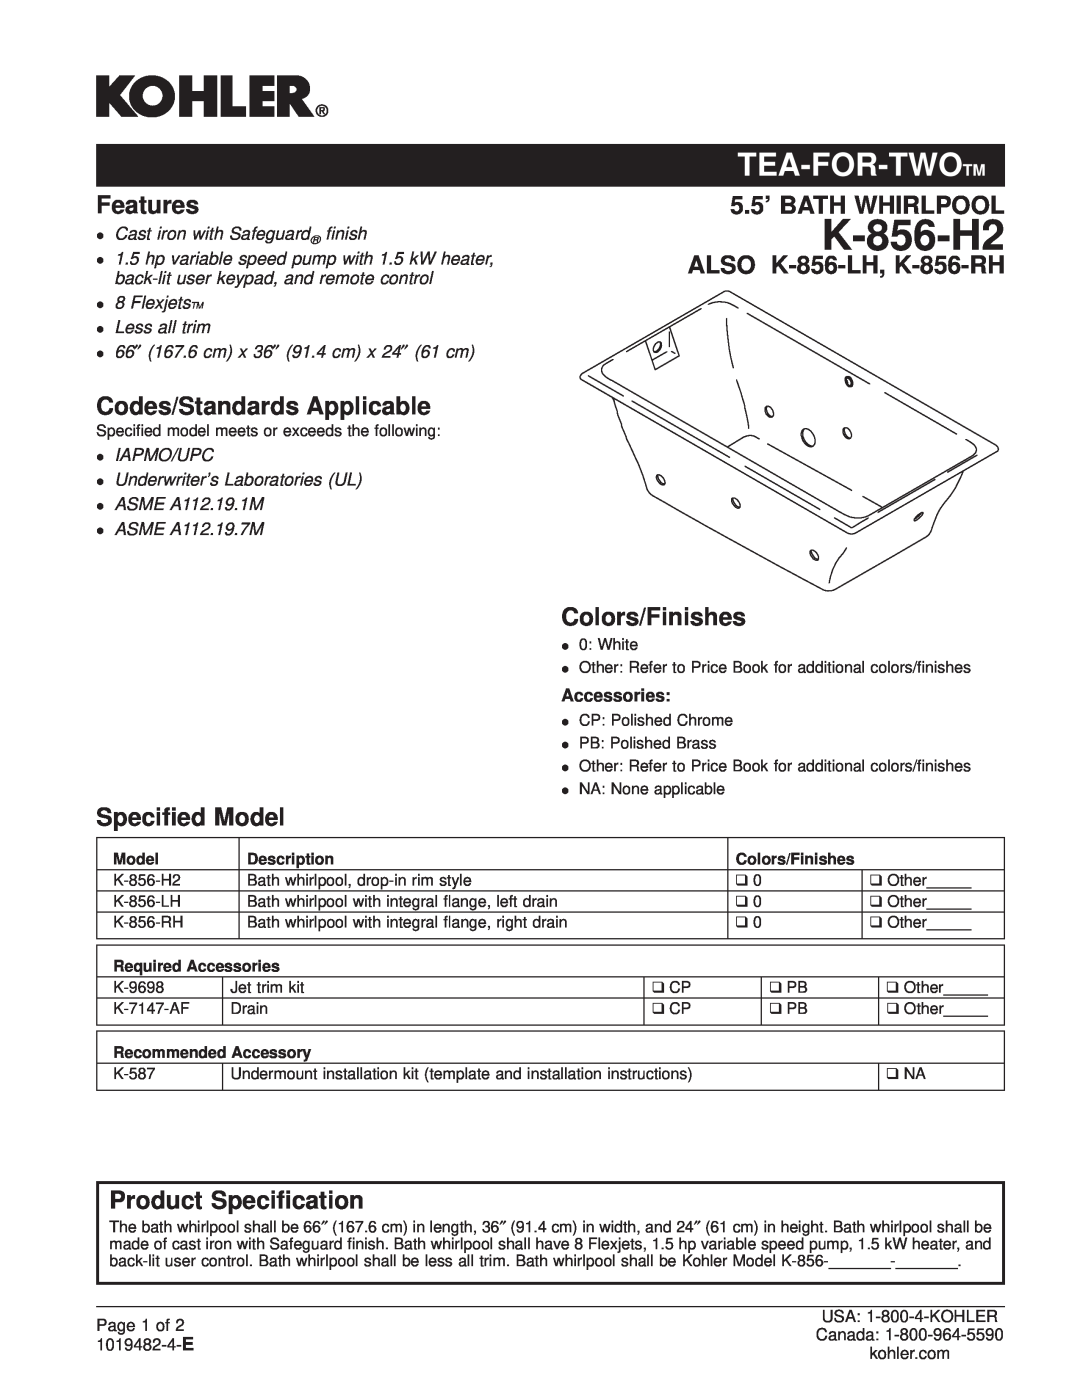 Kohler K-856-LH installation instructions Tea-For-Twotm, Features, Codes/Standards Applicable, Specied Model, Accessories 